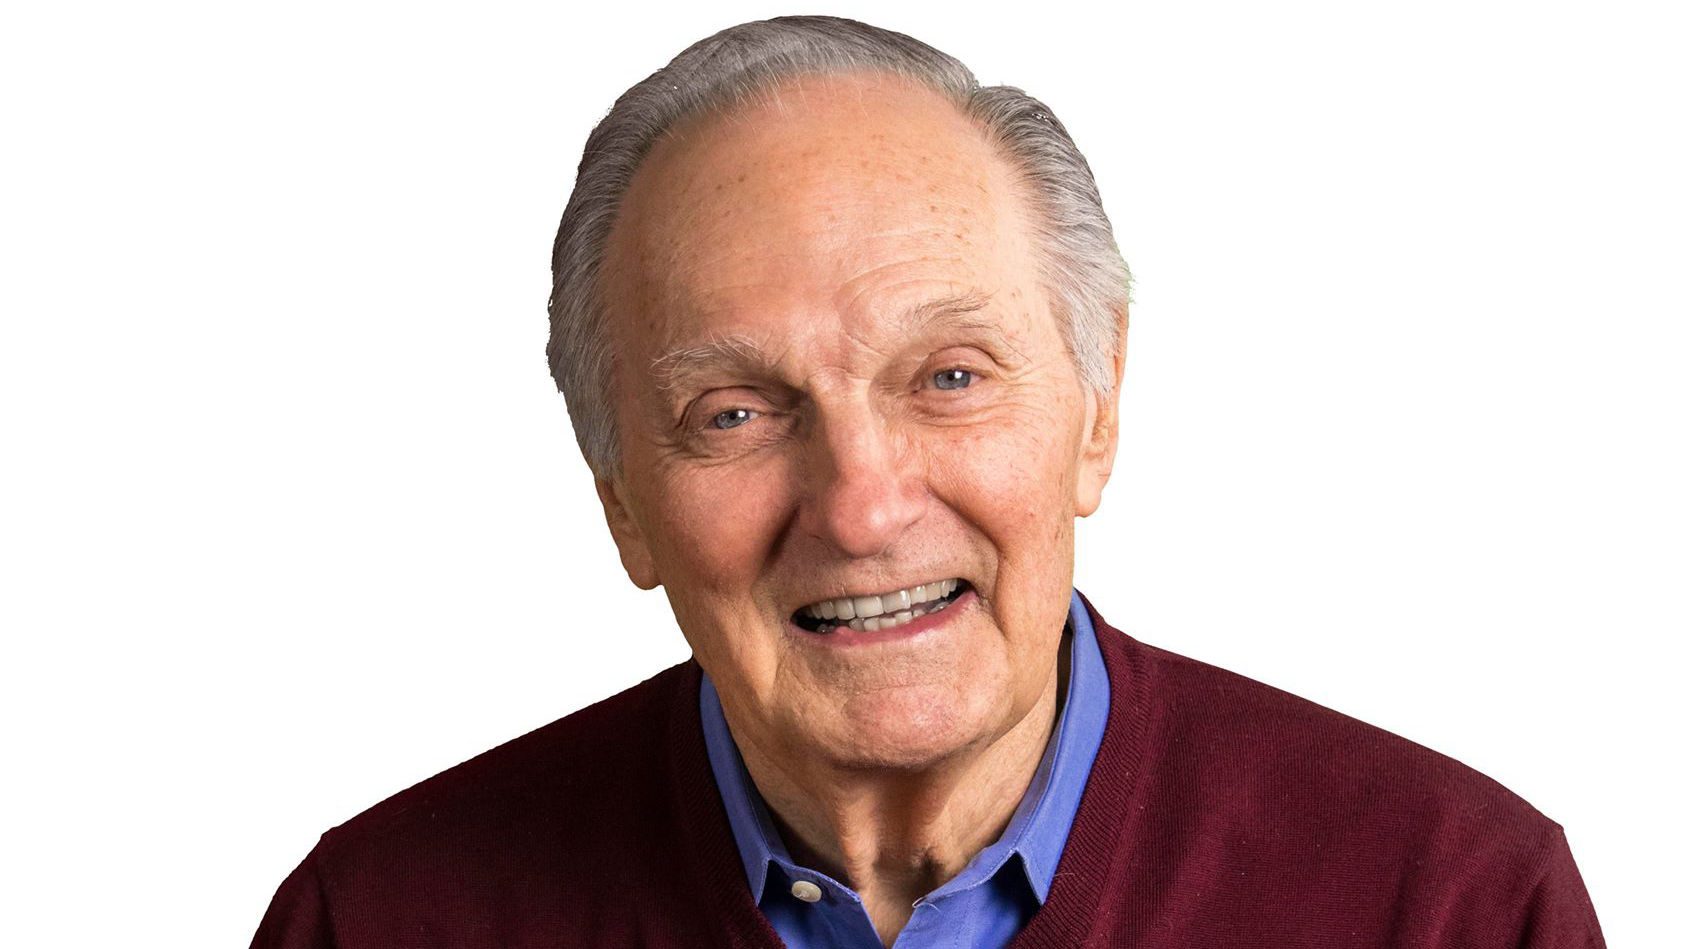 Alan Alda Reflects on His Life as An Actor